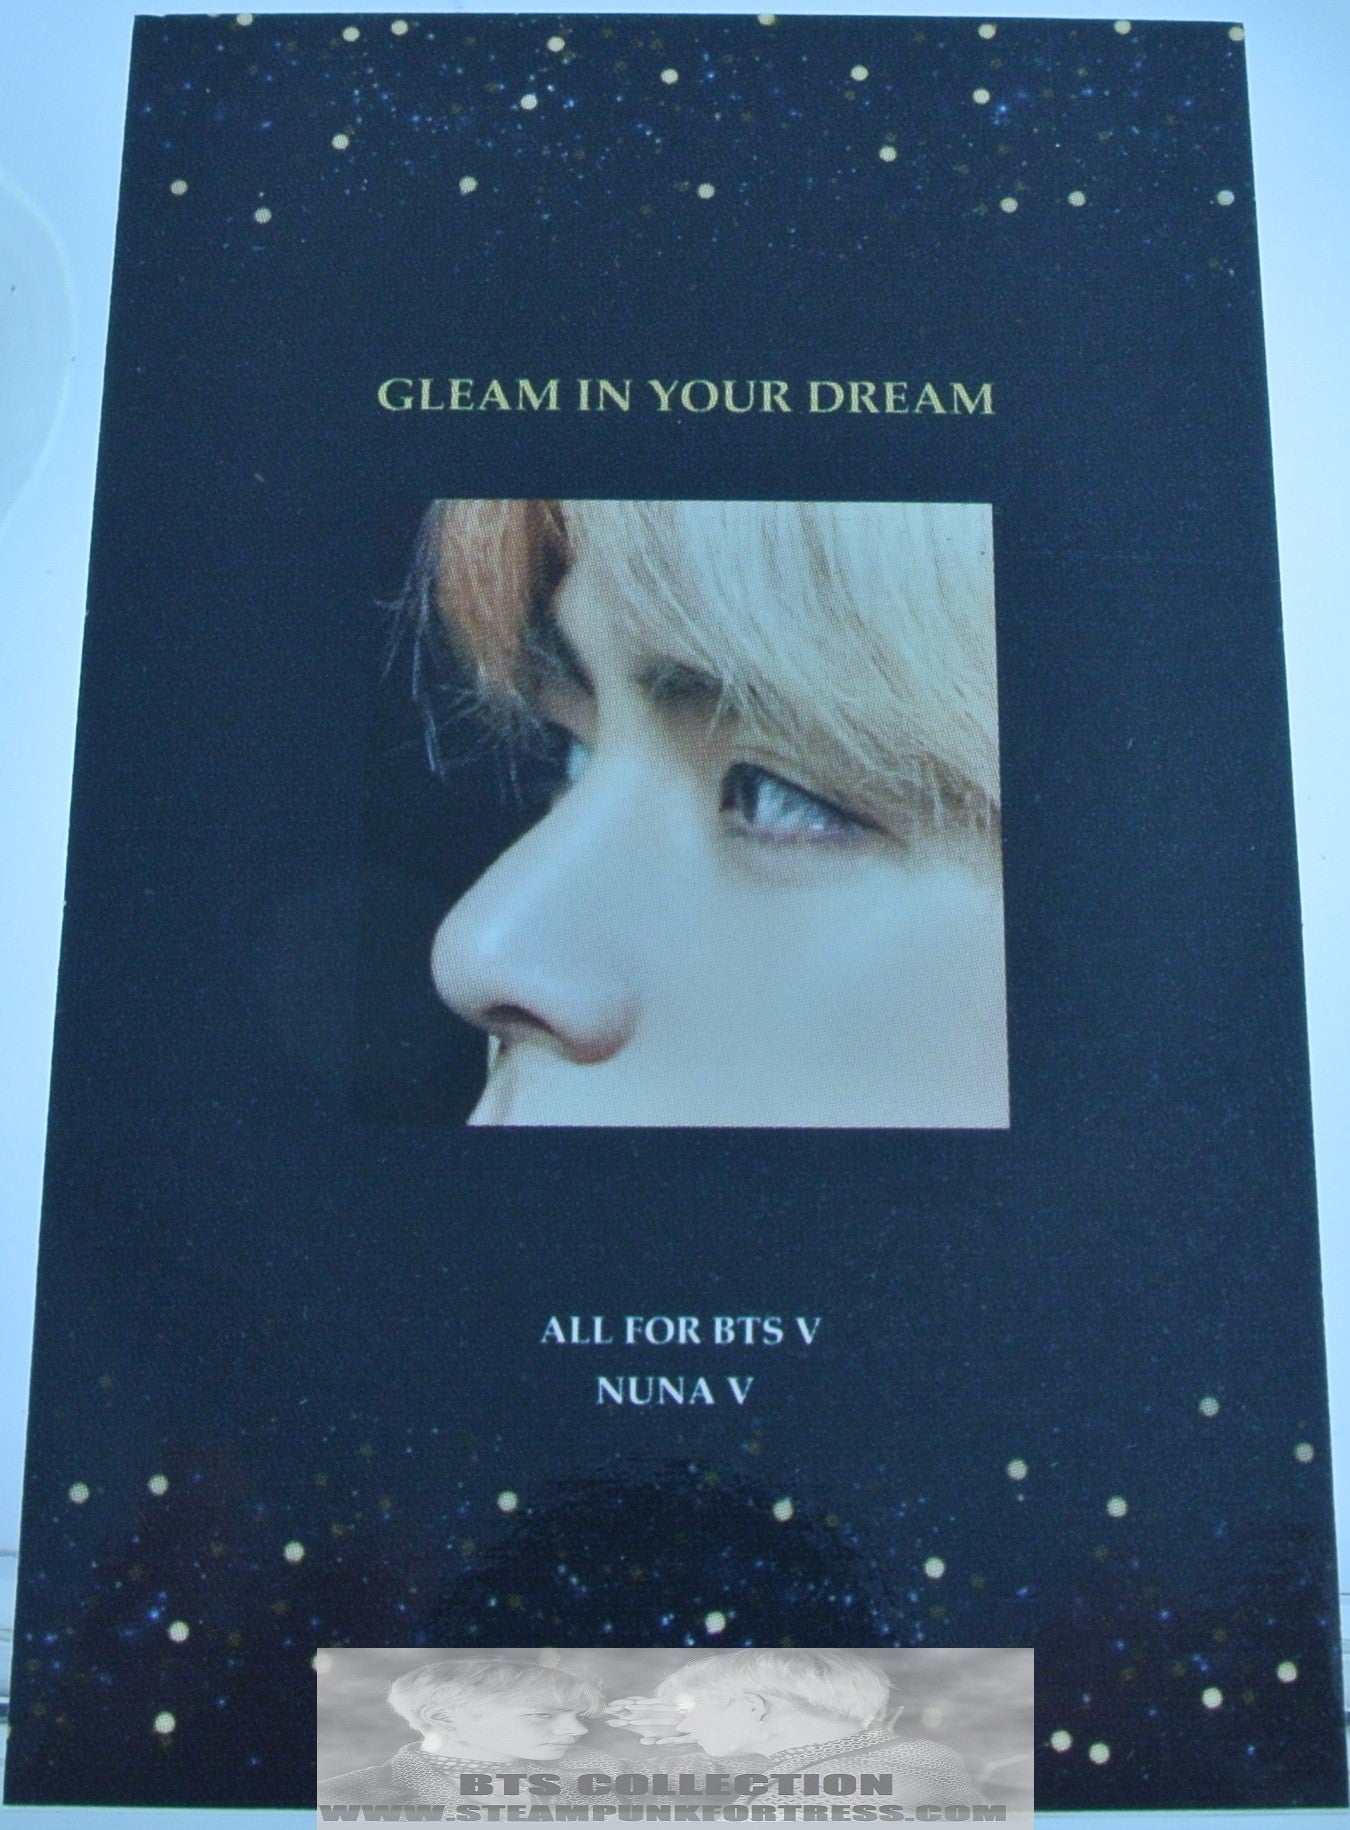 BTS V KIM TAEHYUNG FANSITE PHOTOCARD MOUTH CLOSED PROFILE GLEAM IN YOUR DREAM NUNA V PHOTO CARD